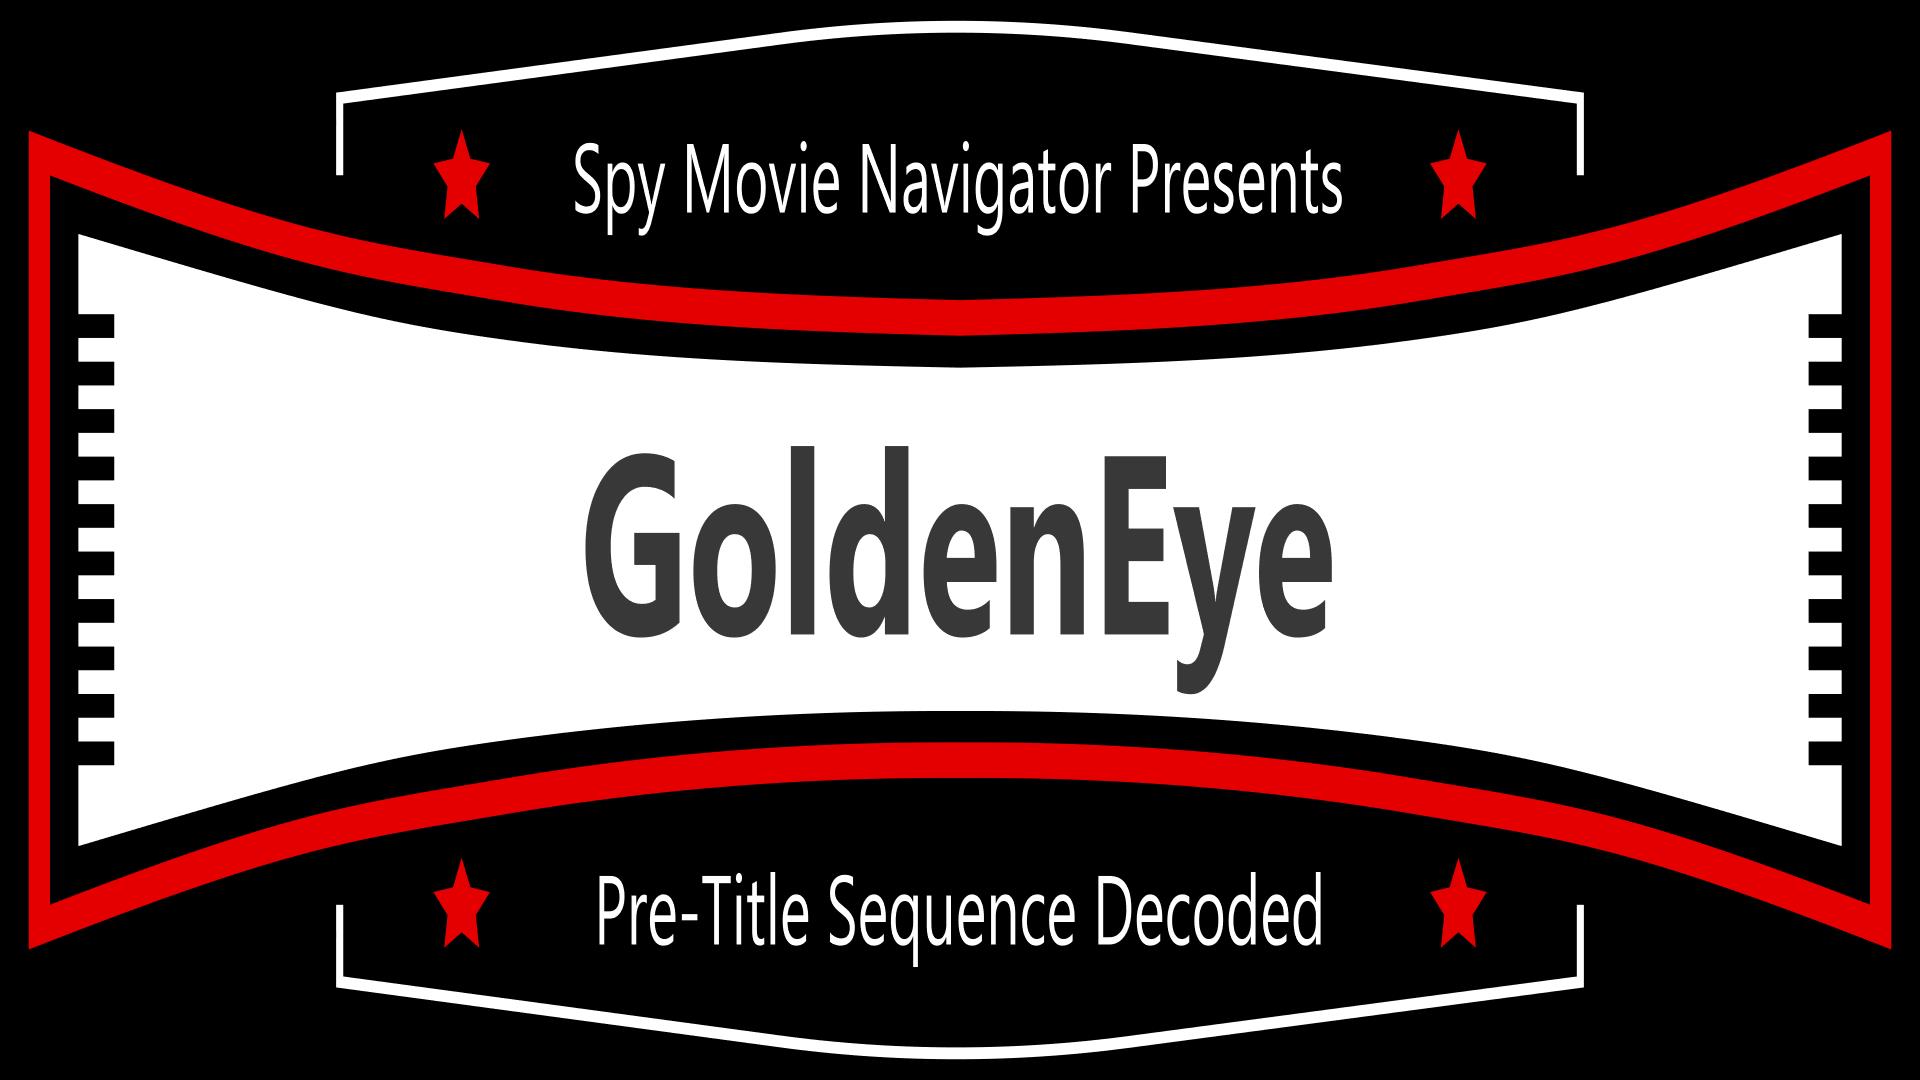 James Bond GoldenEye Pre-Title Sequence Decoded